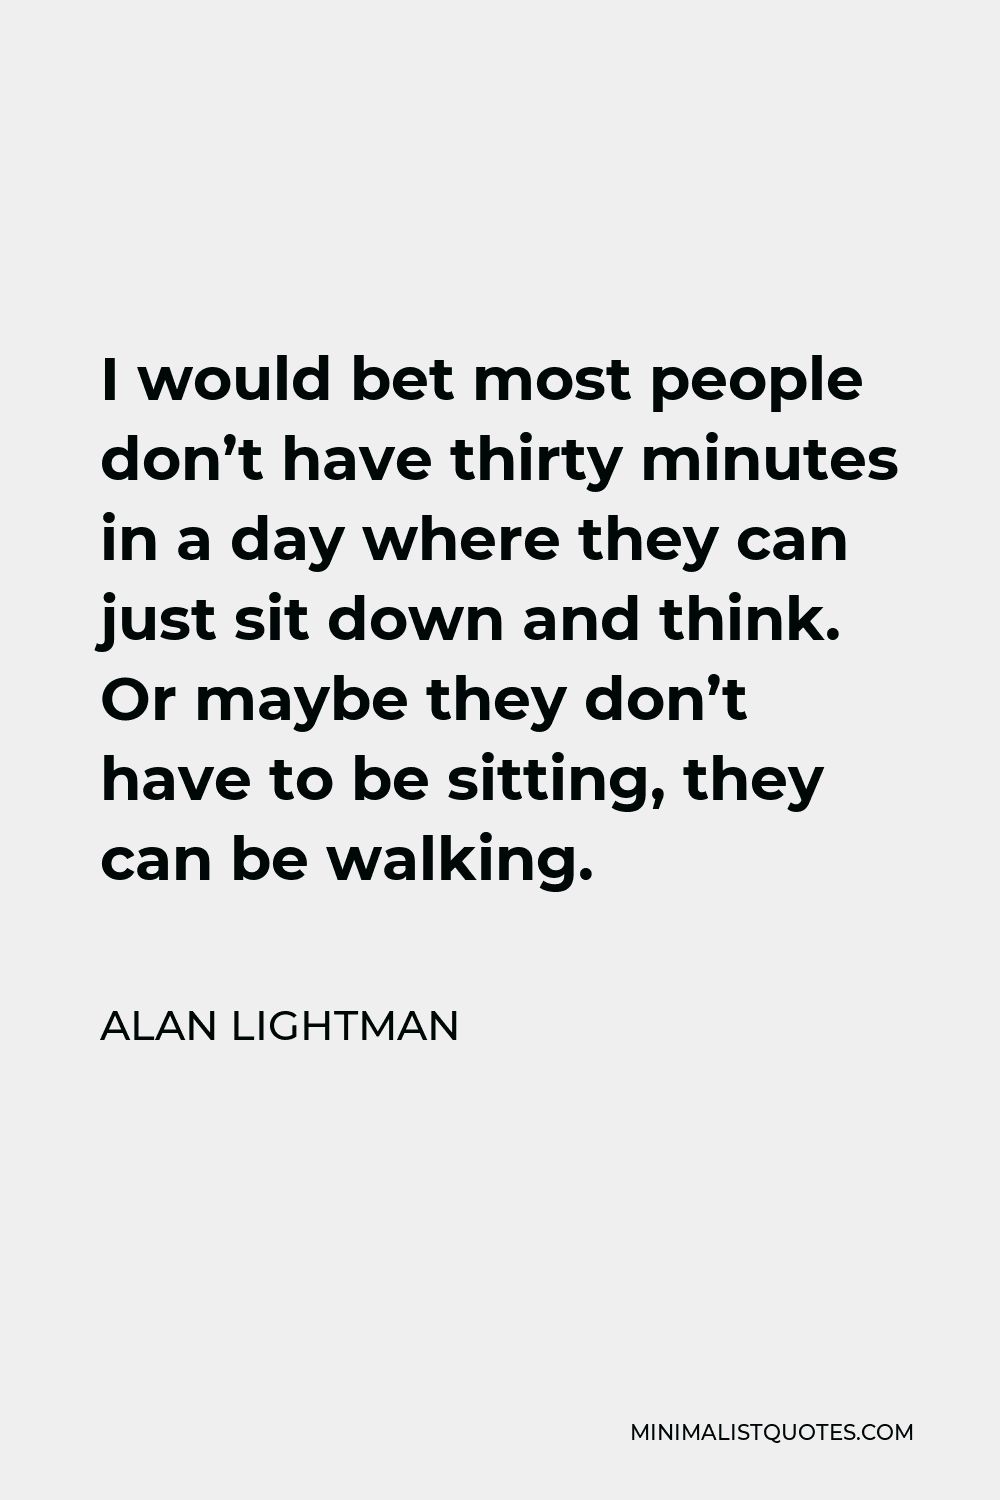 Alan Lightman Quote - I would bet most people don’t have thirty minutes in a day where they can just sit down and think. Or maybe they don’t have to be sitting, they can be walking.